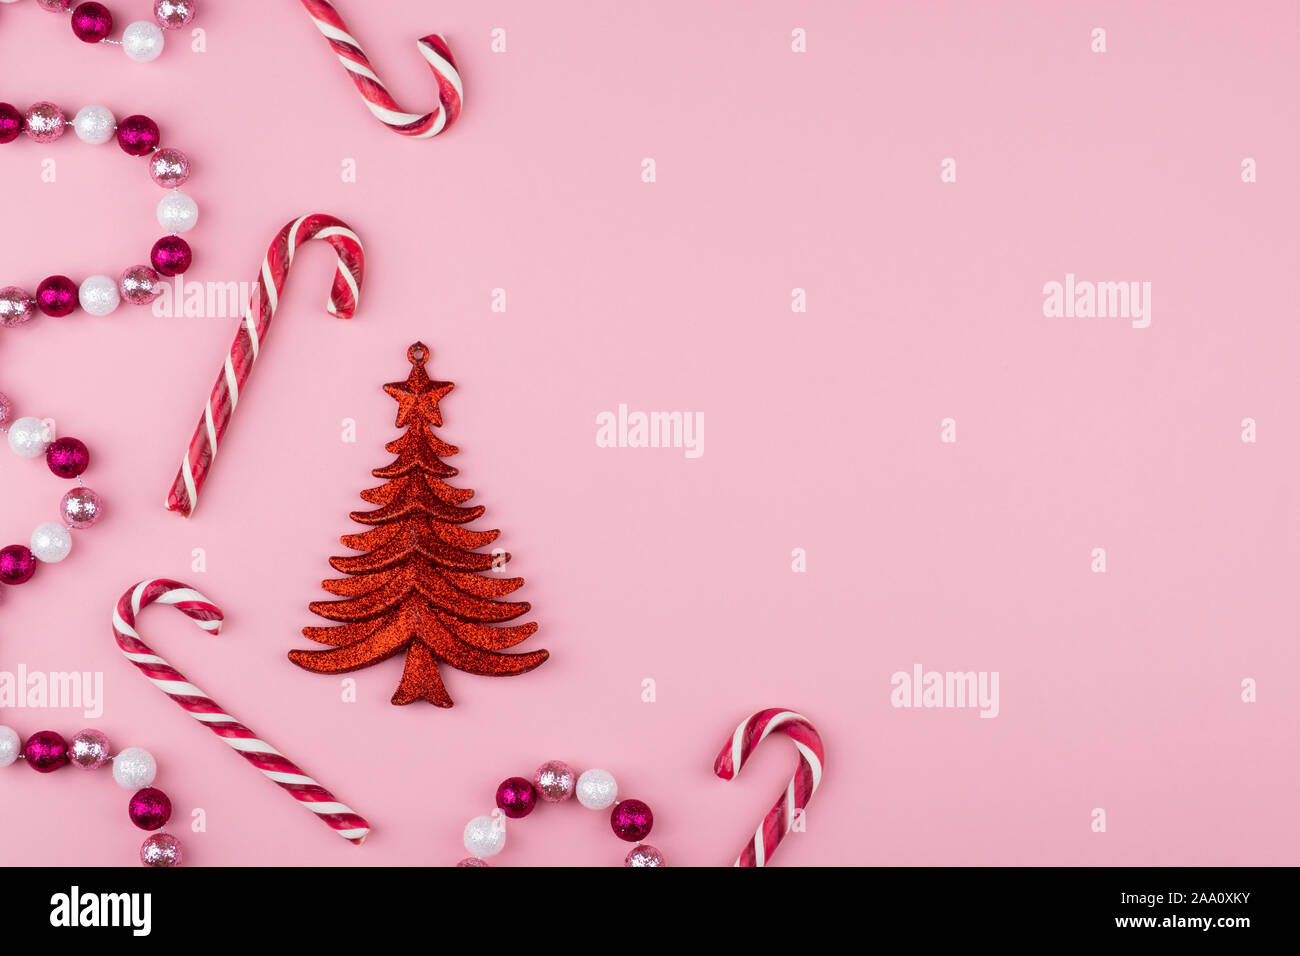 Christmas background with candy, garlands, christmas tree on a pink background. Flat lay, top view Stock Photo